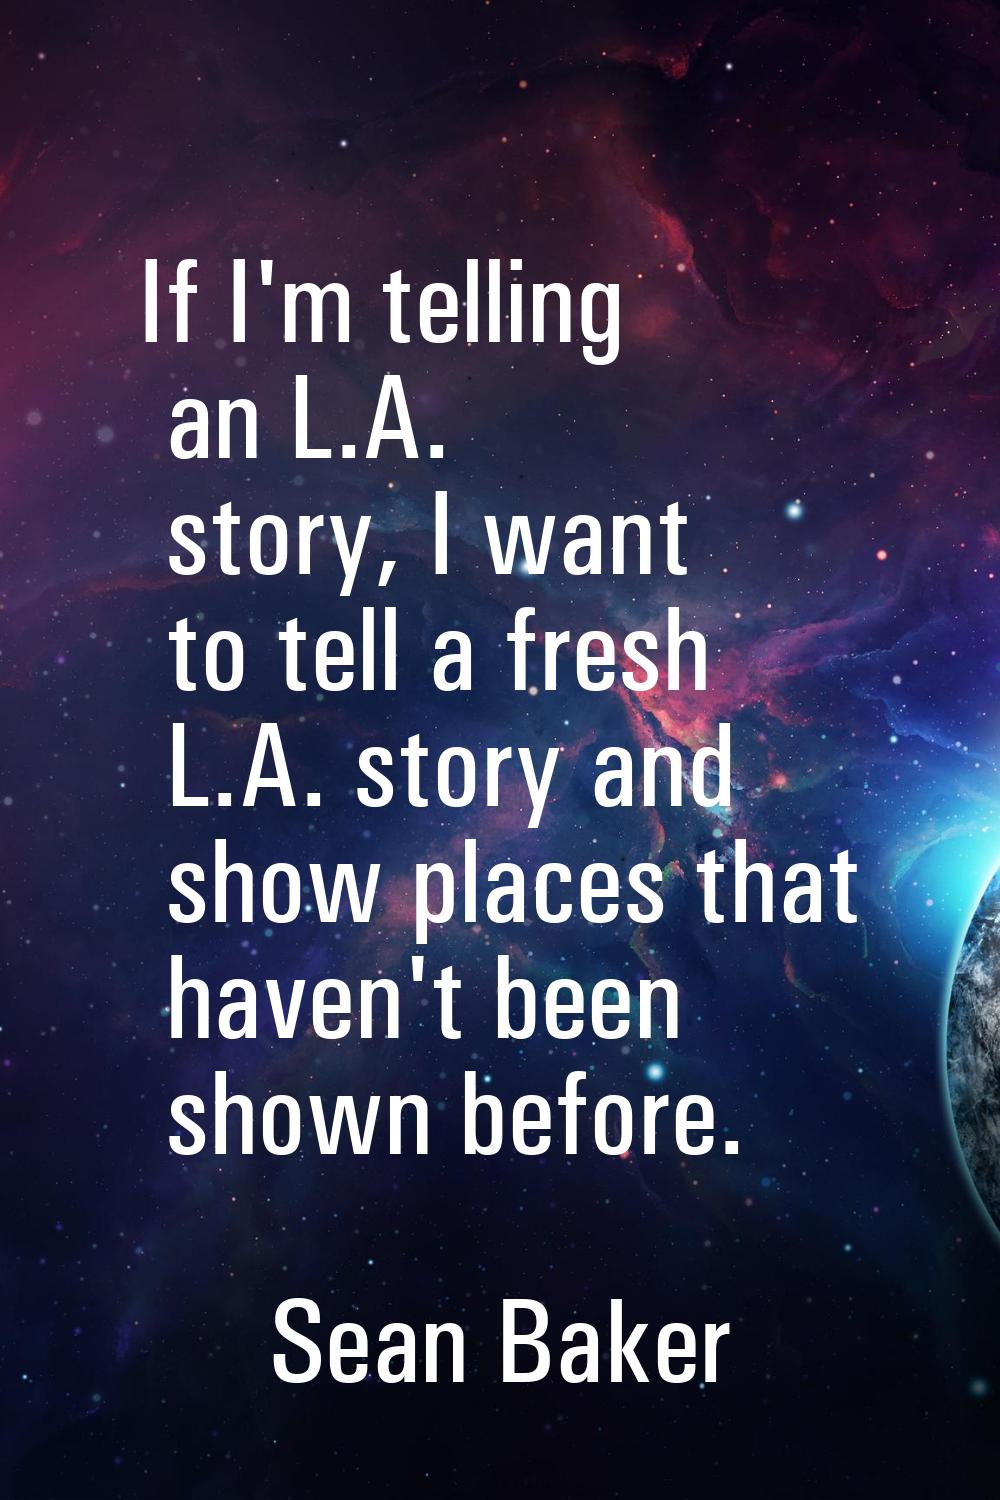 If I'm telling an L.A. story, I want to tell a fresh L.A. story and show places that haven't been s